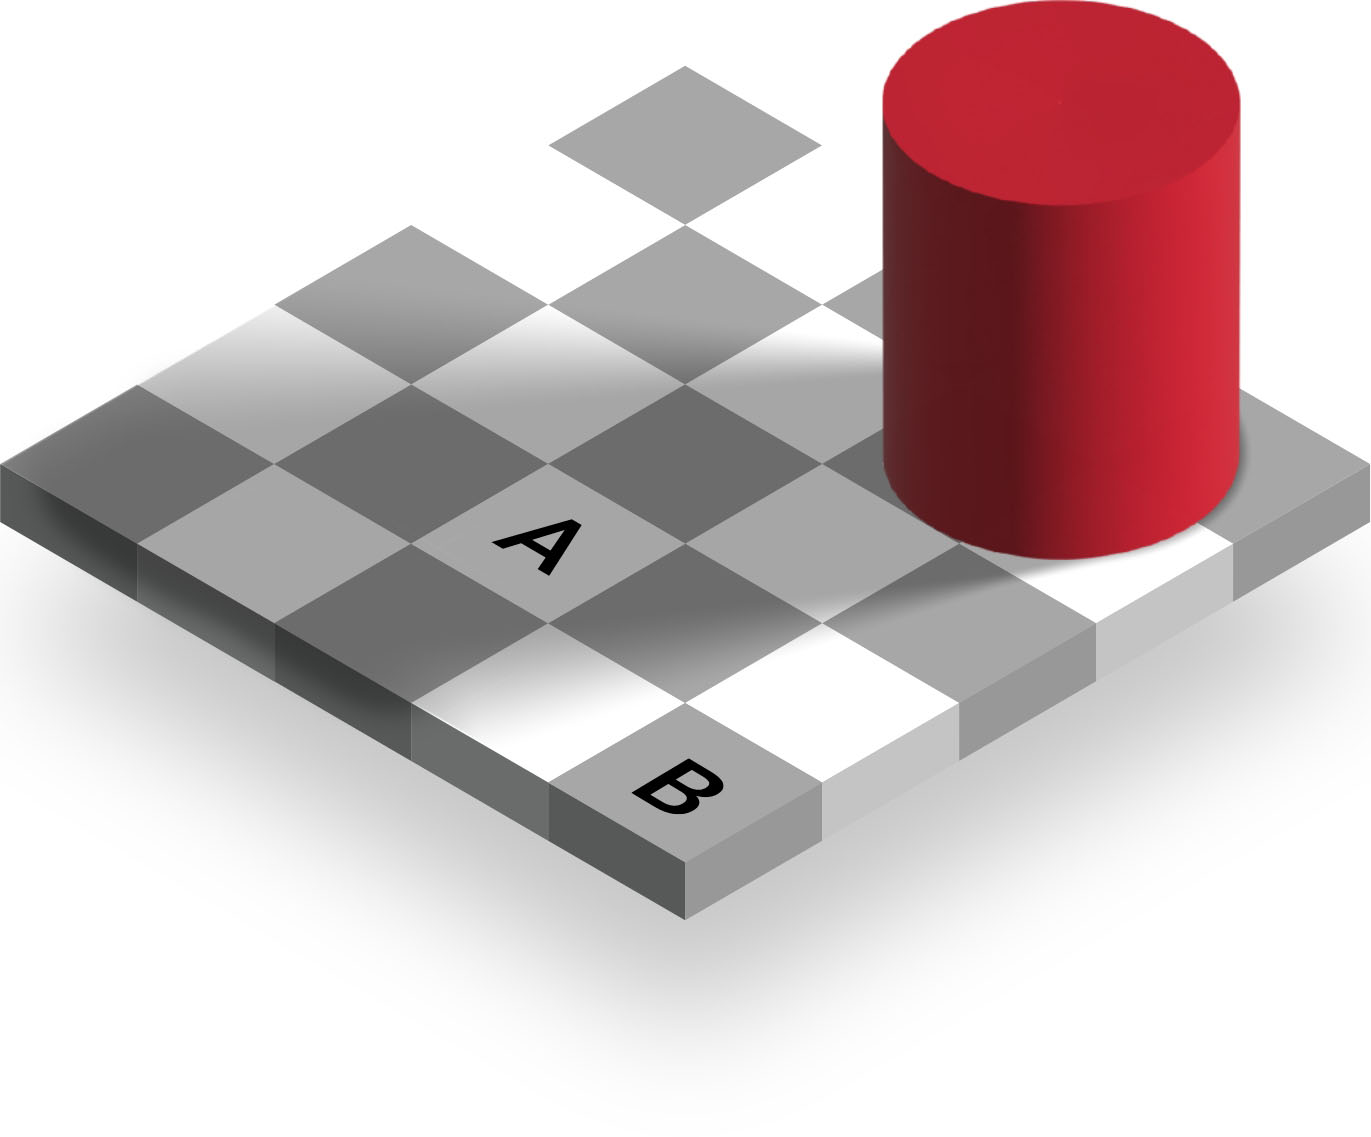 gray-and-white-checkerboard-with-red-cylinder-casting-a-shadow